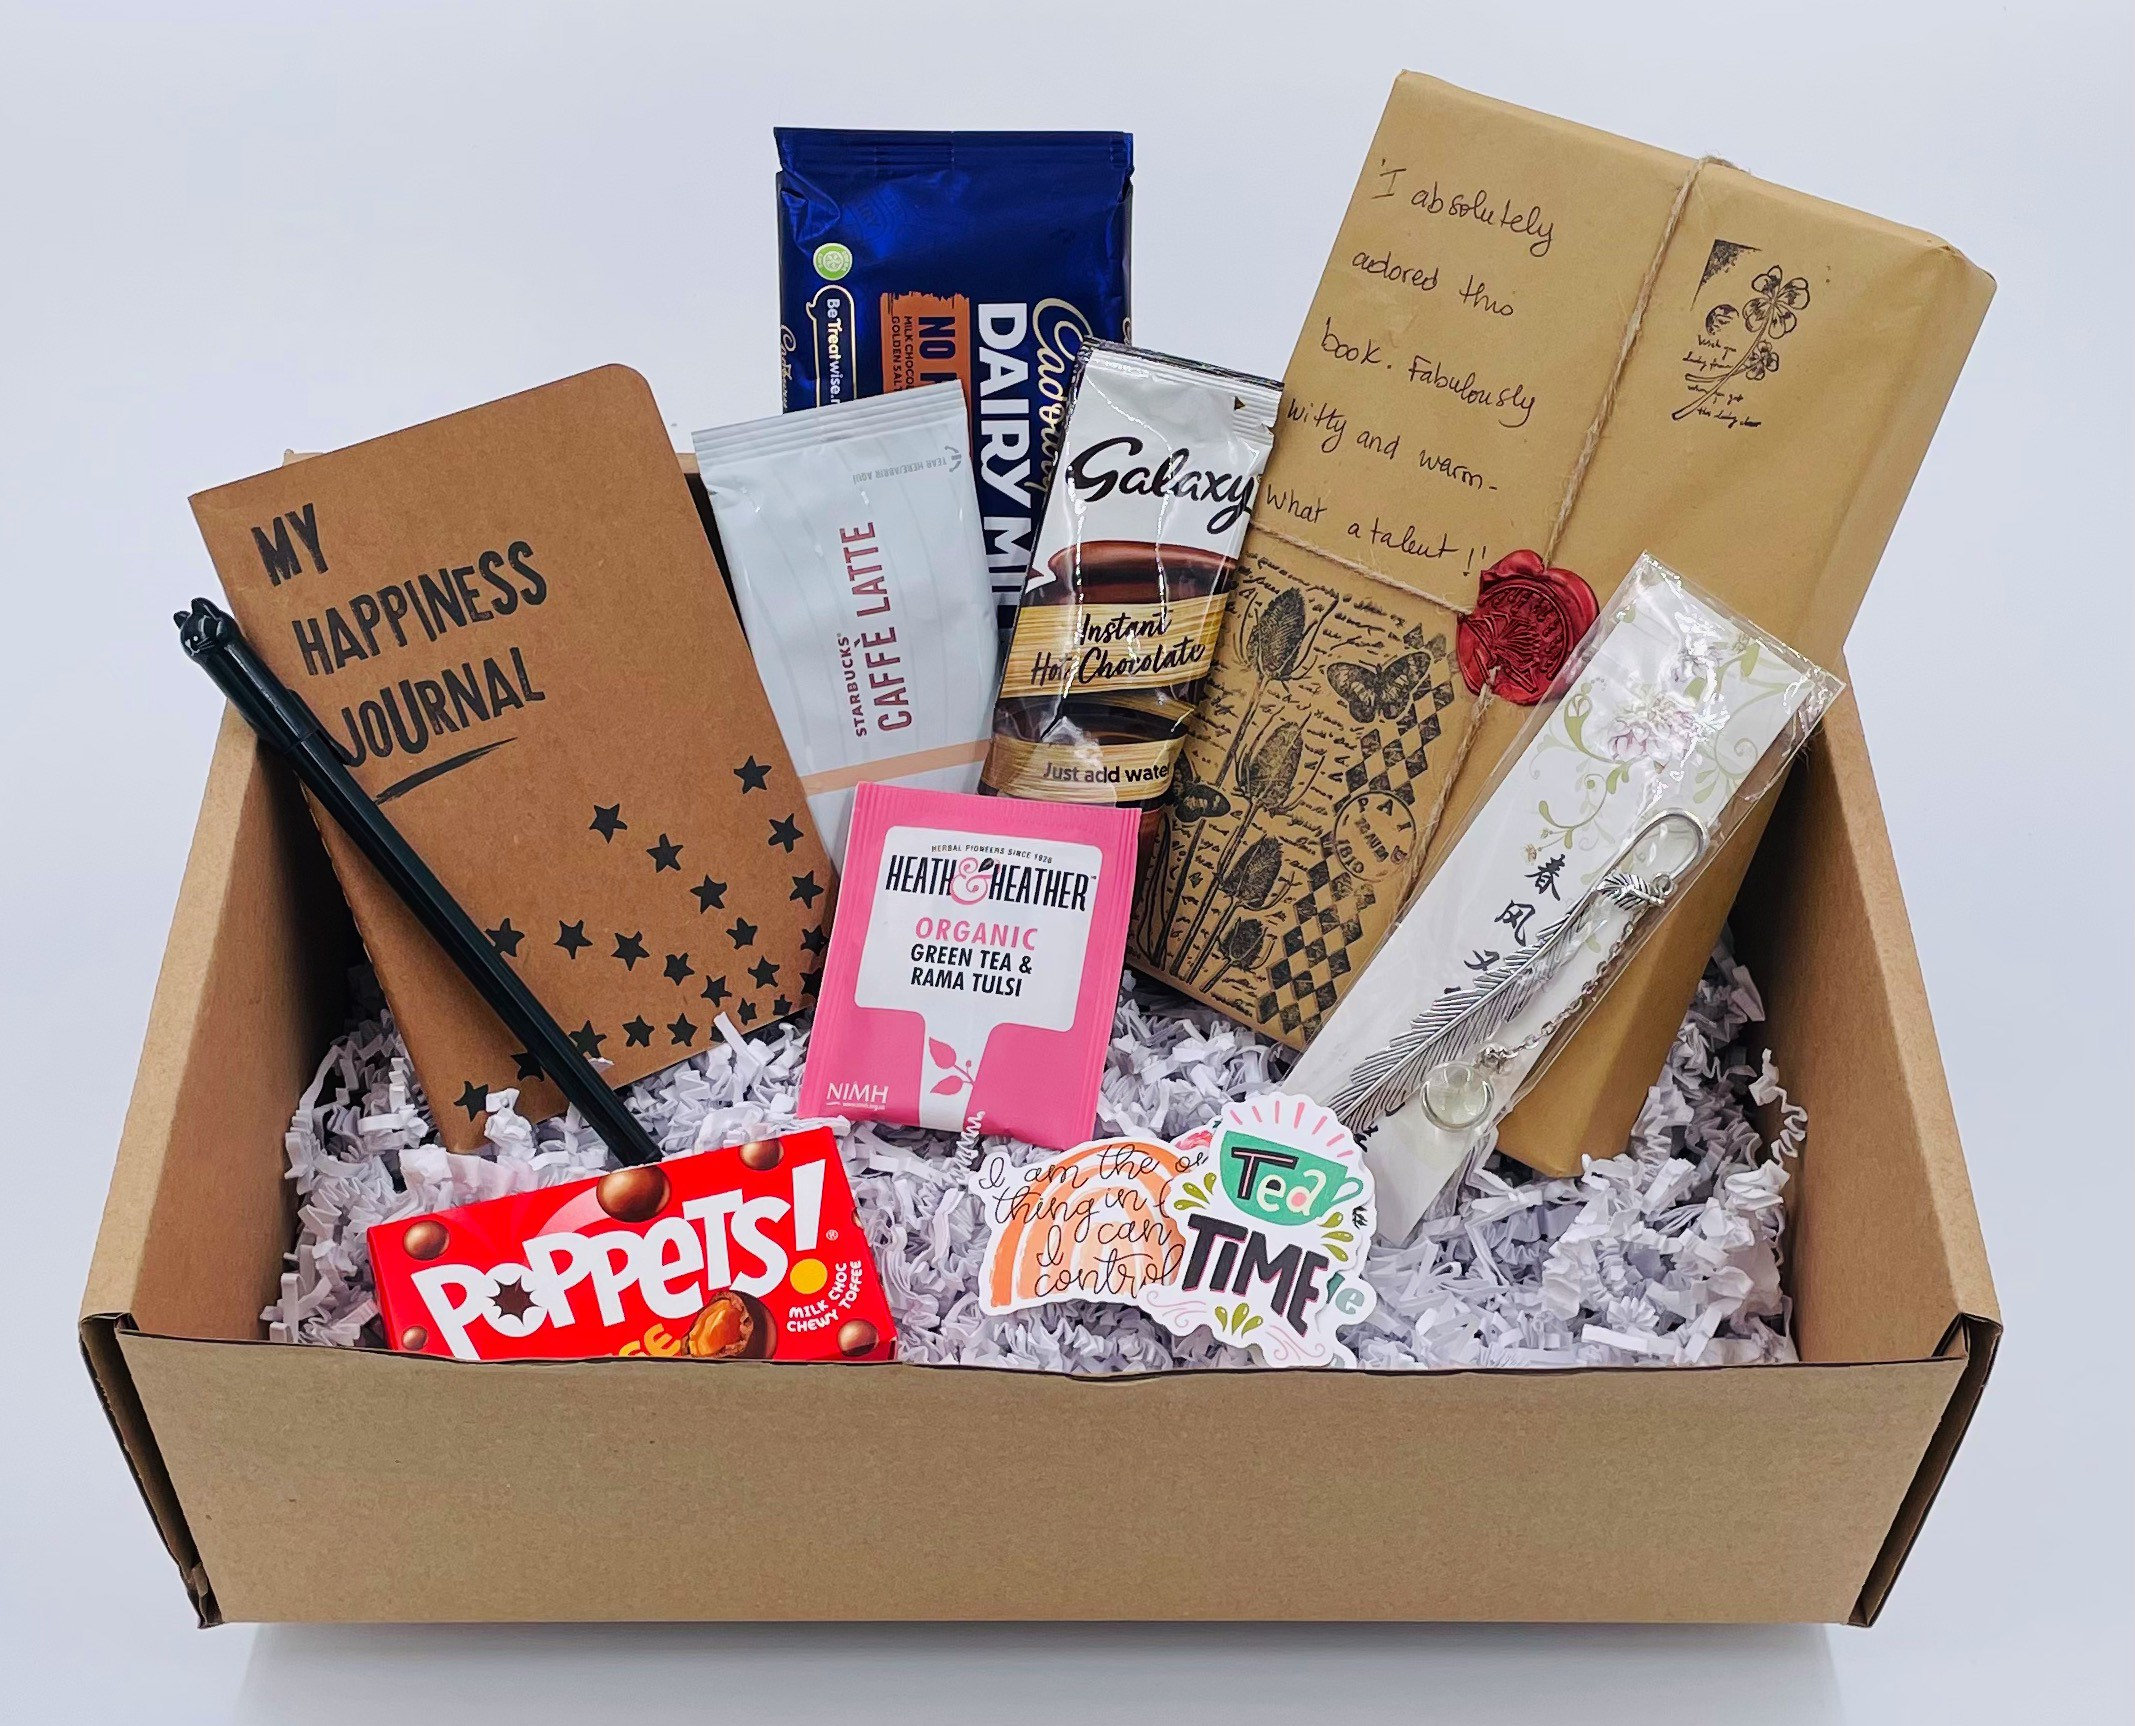 Bookish Gift Box Blind Date With a Preloved Book Box Gift for Best Friend  Get Well Soon Gift Box for Her/him/them 